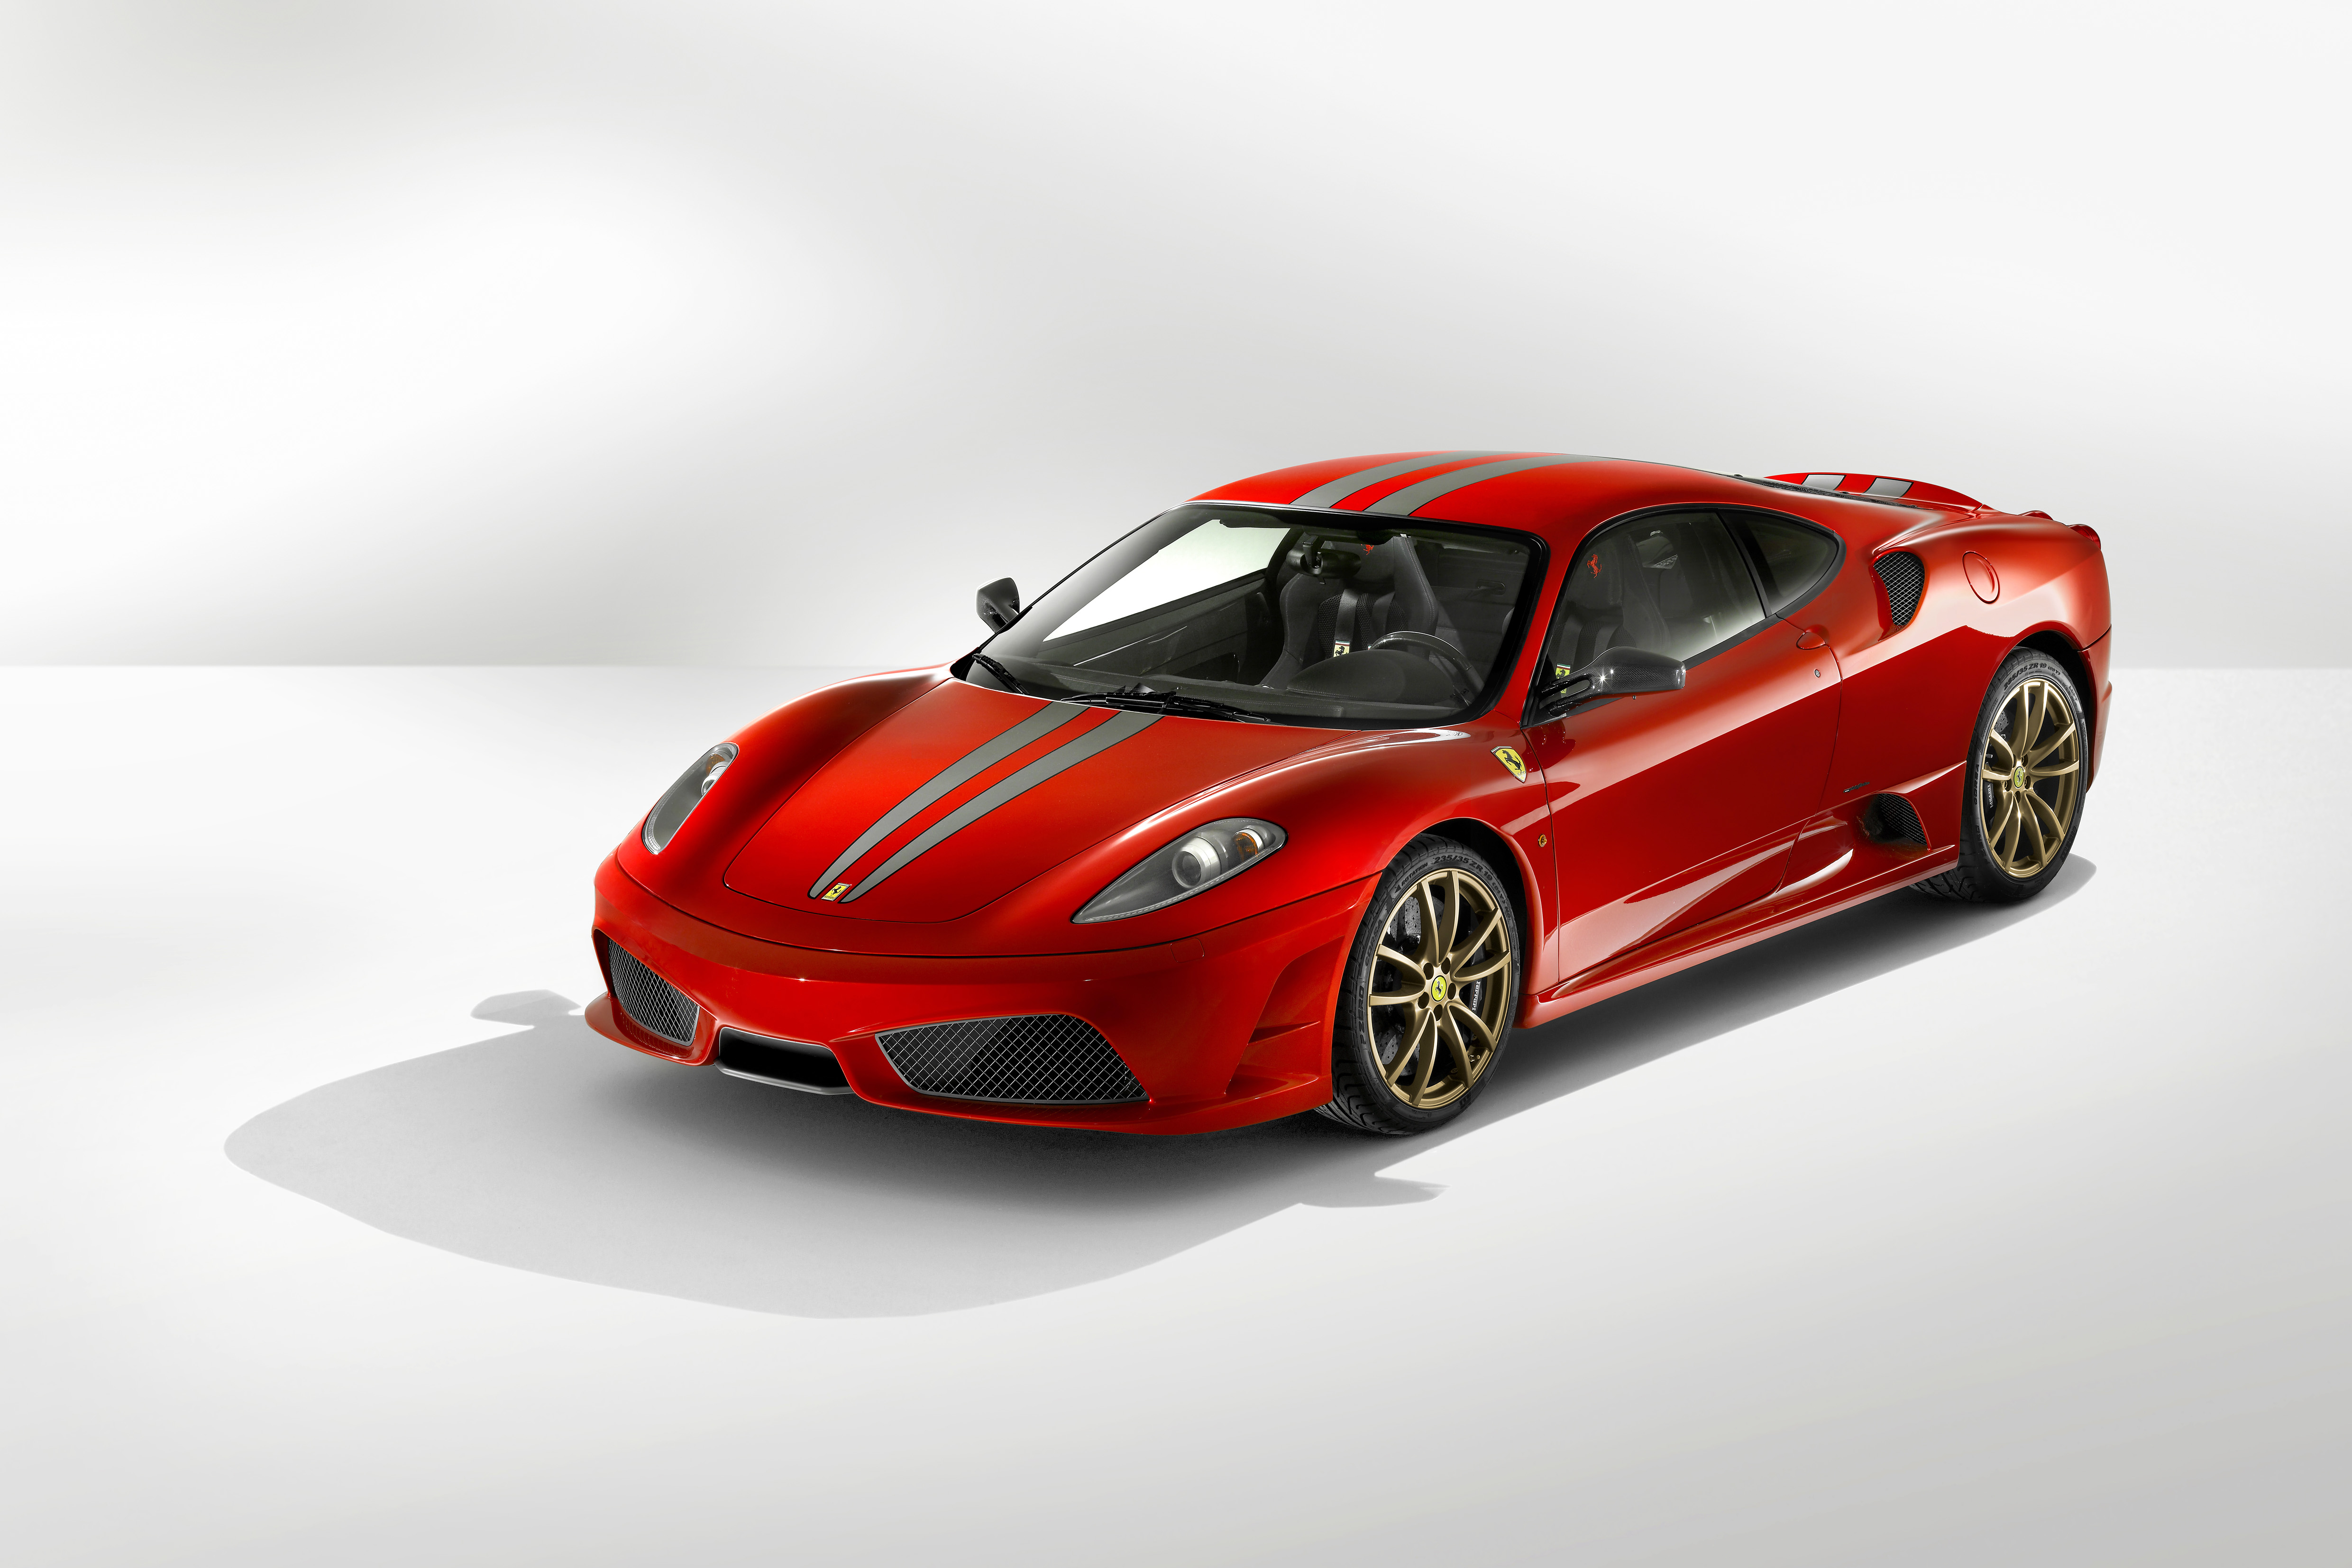 The 430 Scuderia was stripped-back for better performance